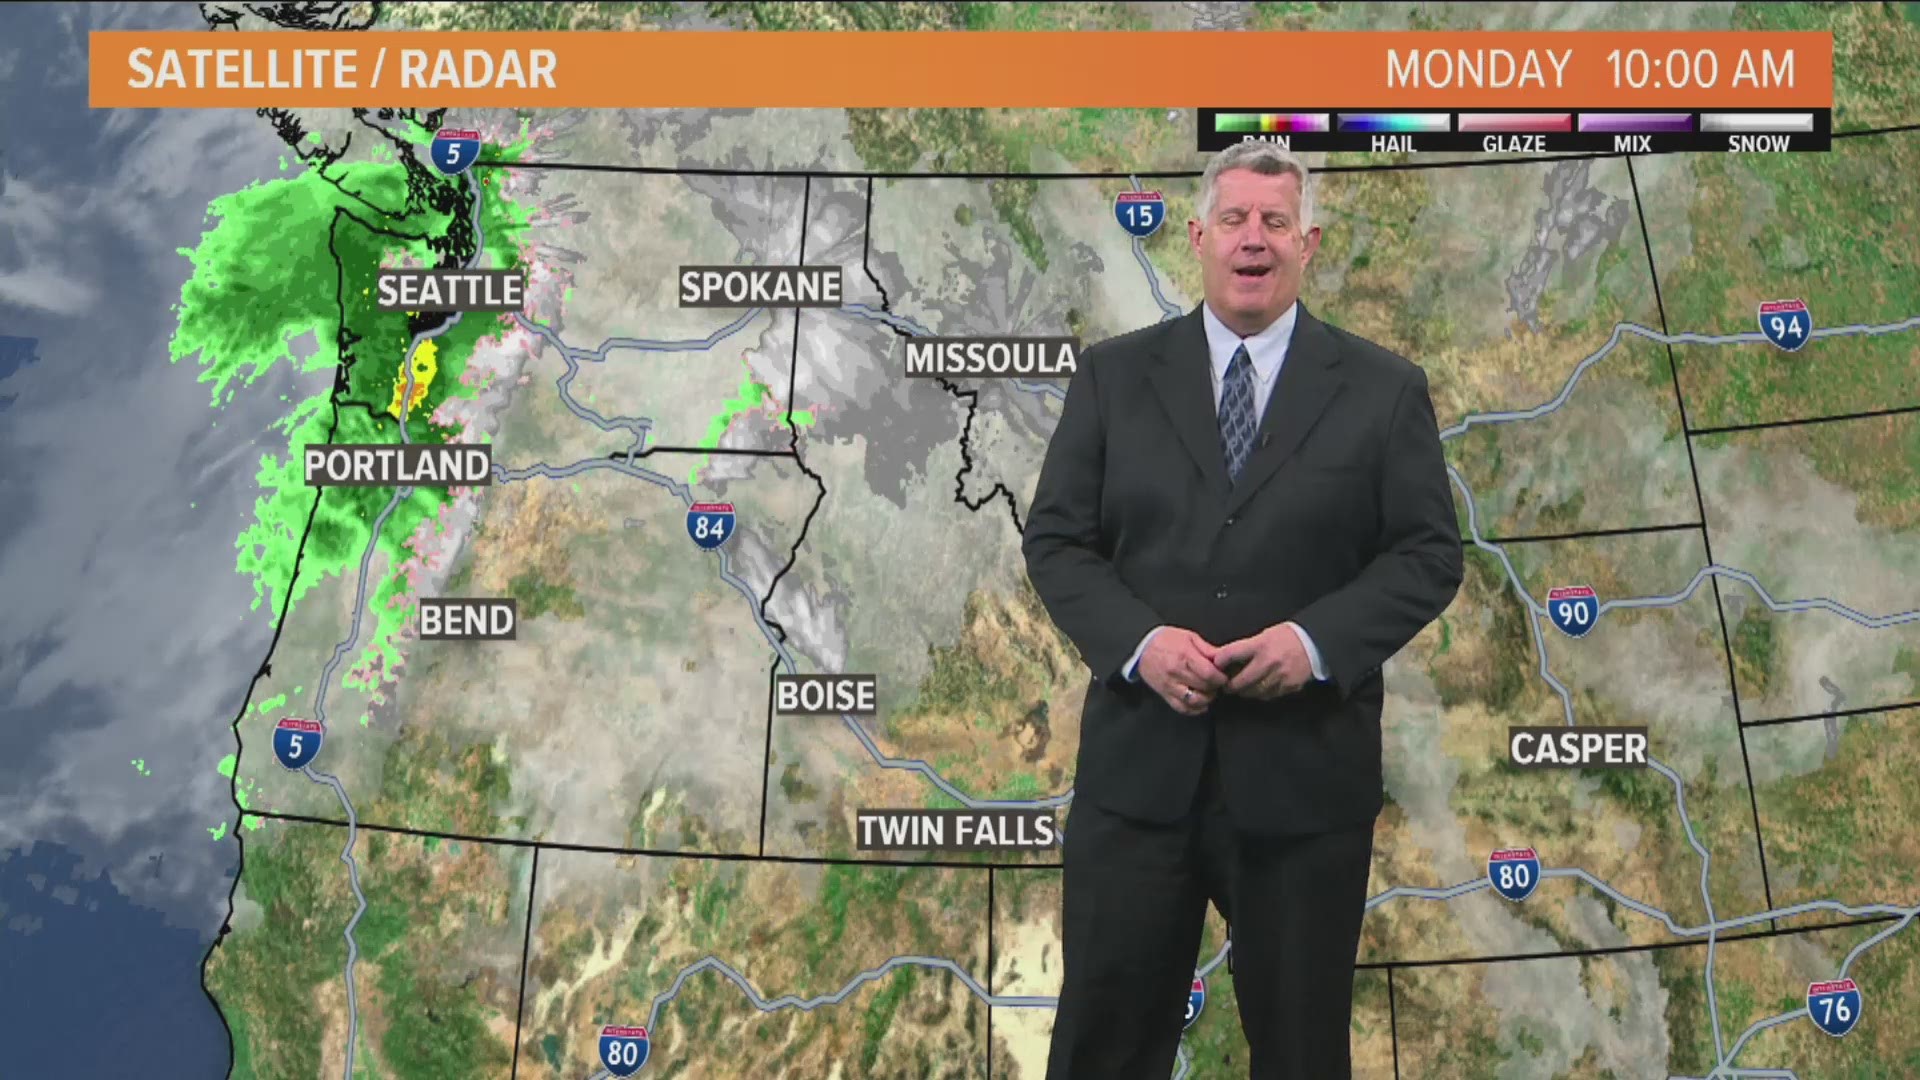 Jim Duthie says to expect mild and dry conditions on Tuesday with a high of 48 degrees in Boise.